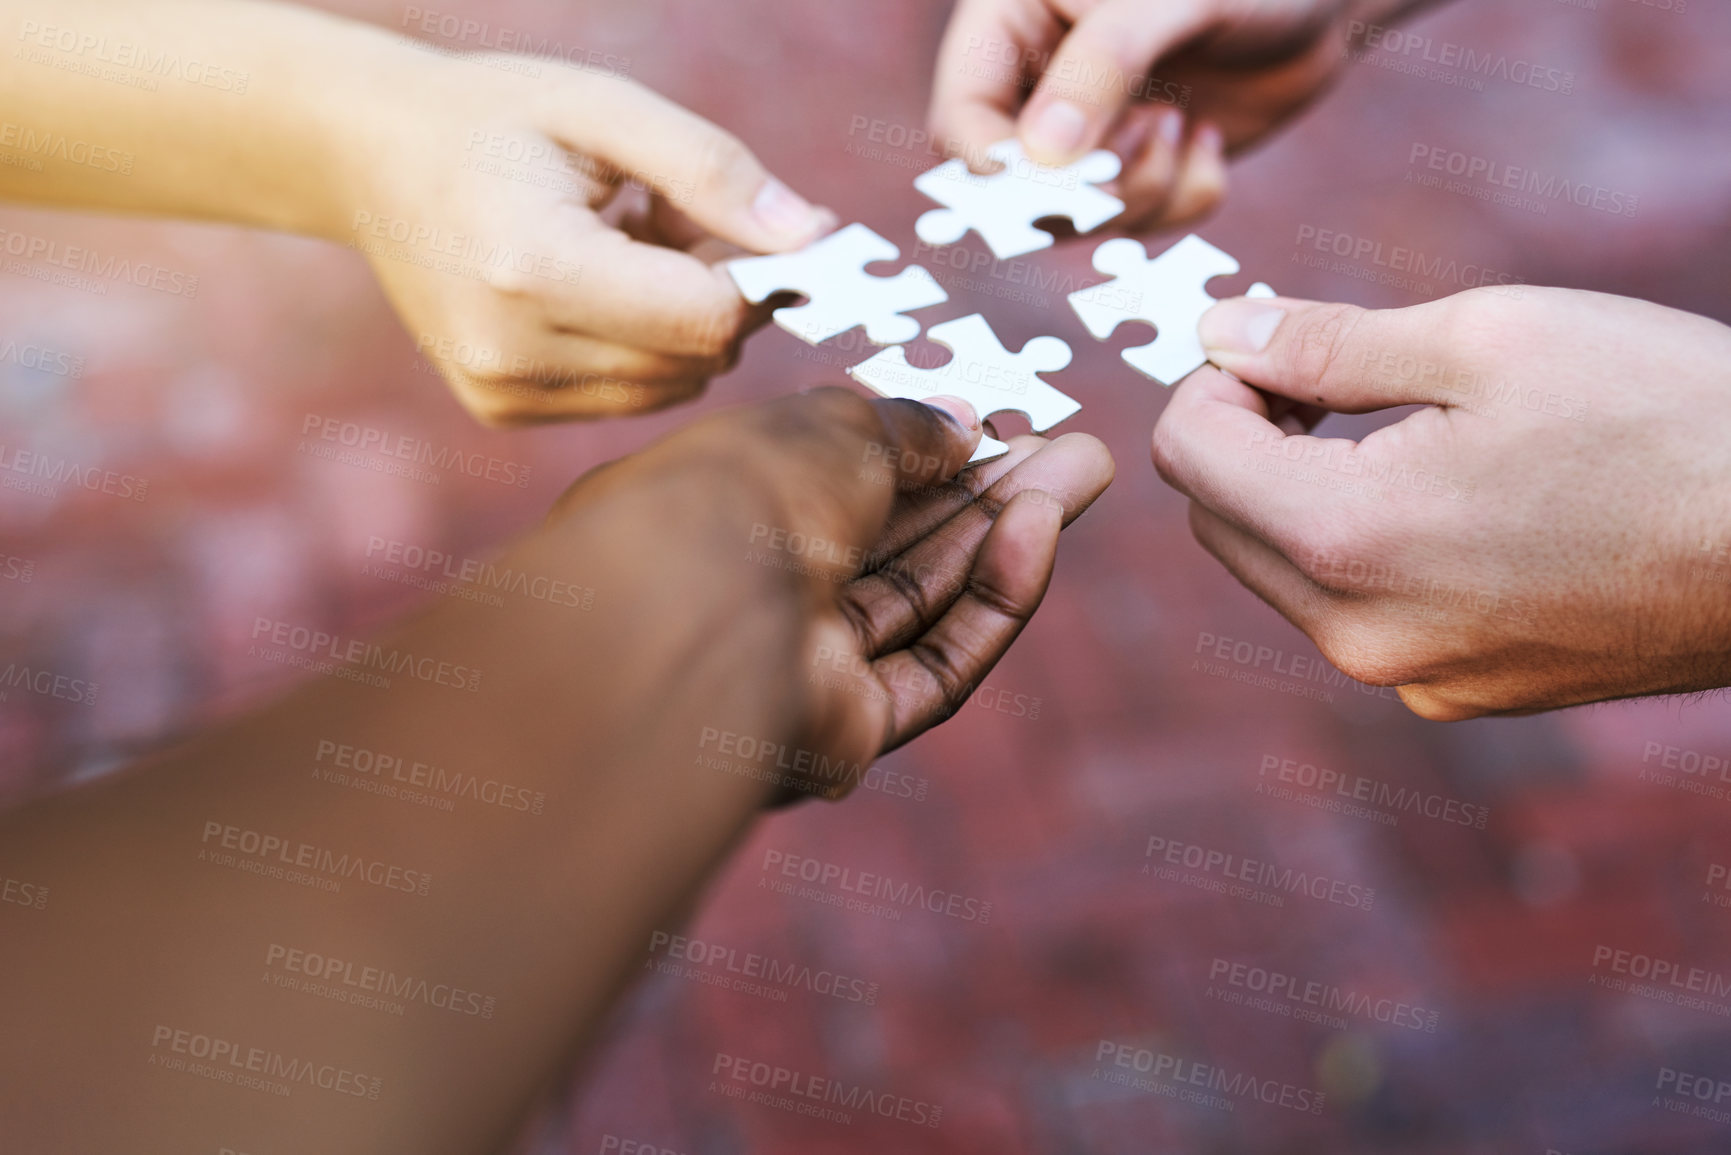 Buy stock photo Shot of hands putting puzzle pieces together